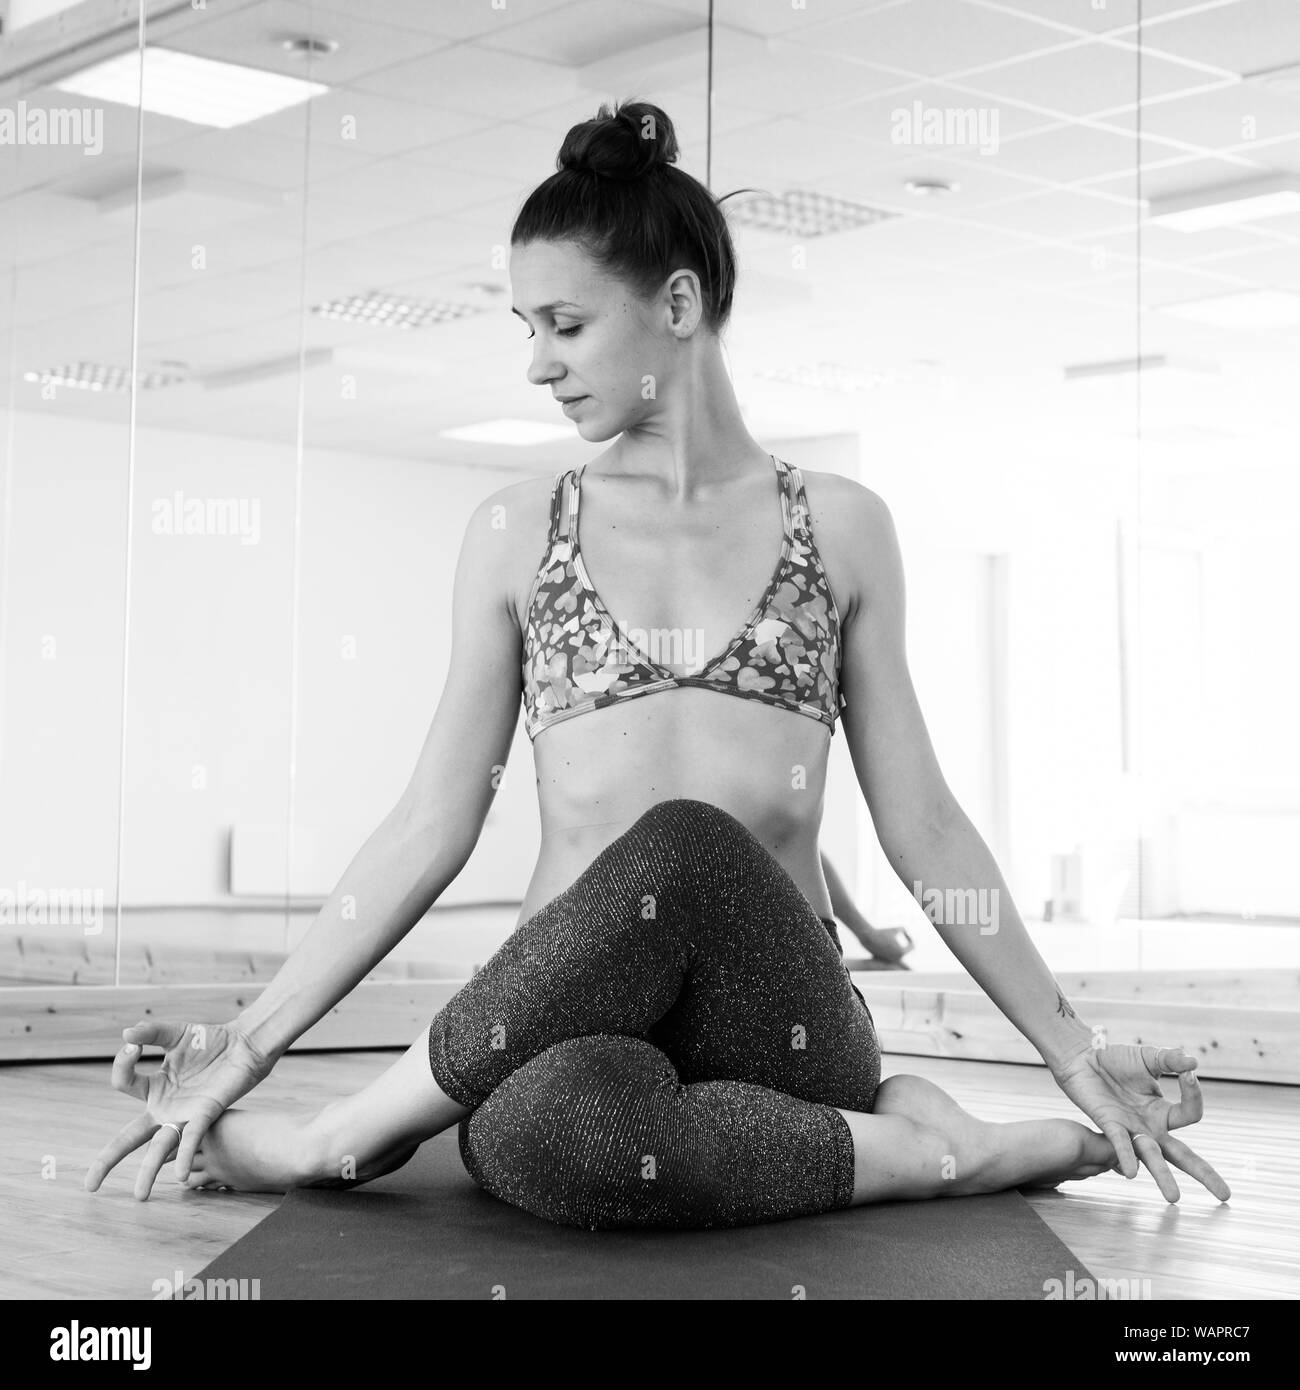 Fit sporty active girl in fashion sportswear doing yoga fitness exercise in yoga studio. Active urban lifestyle. Black and white image. Stock Photo